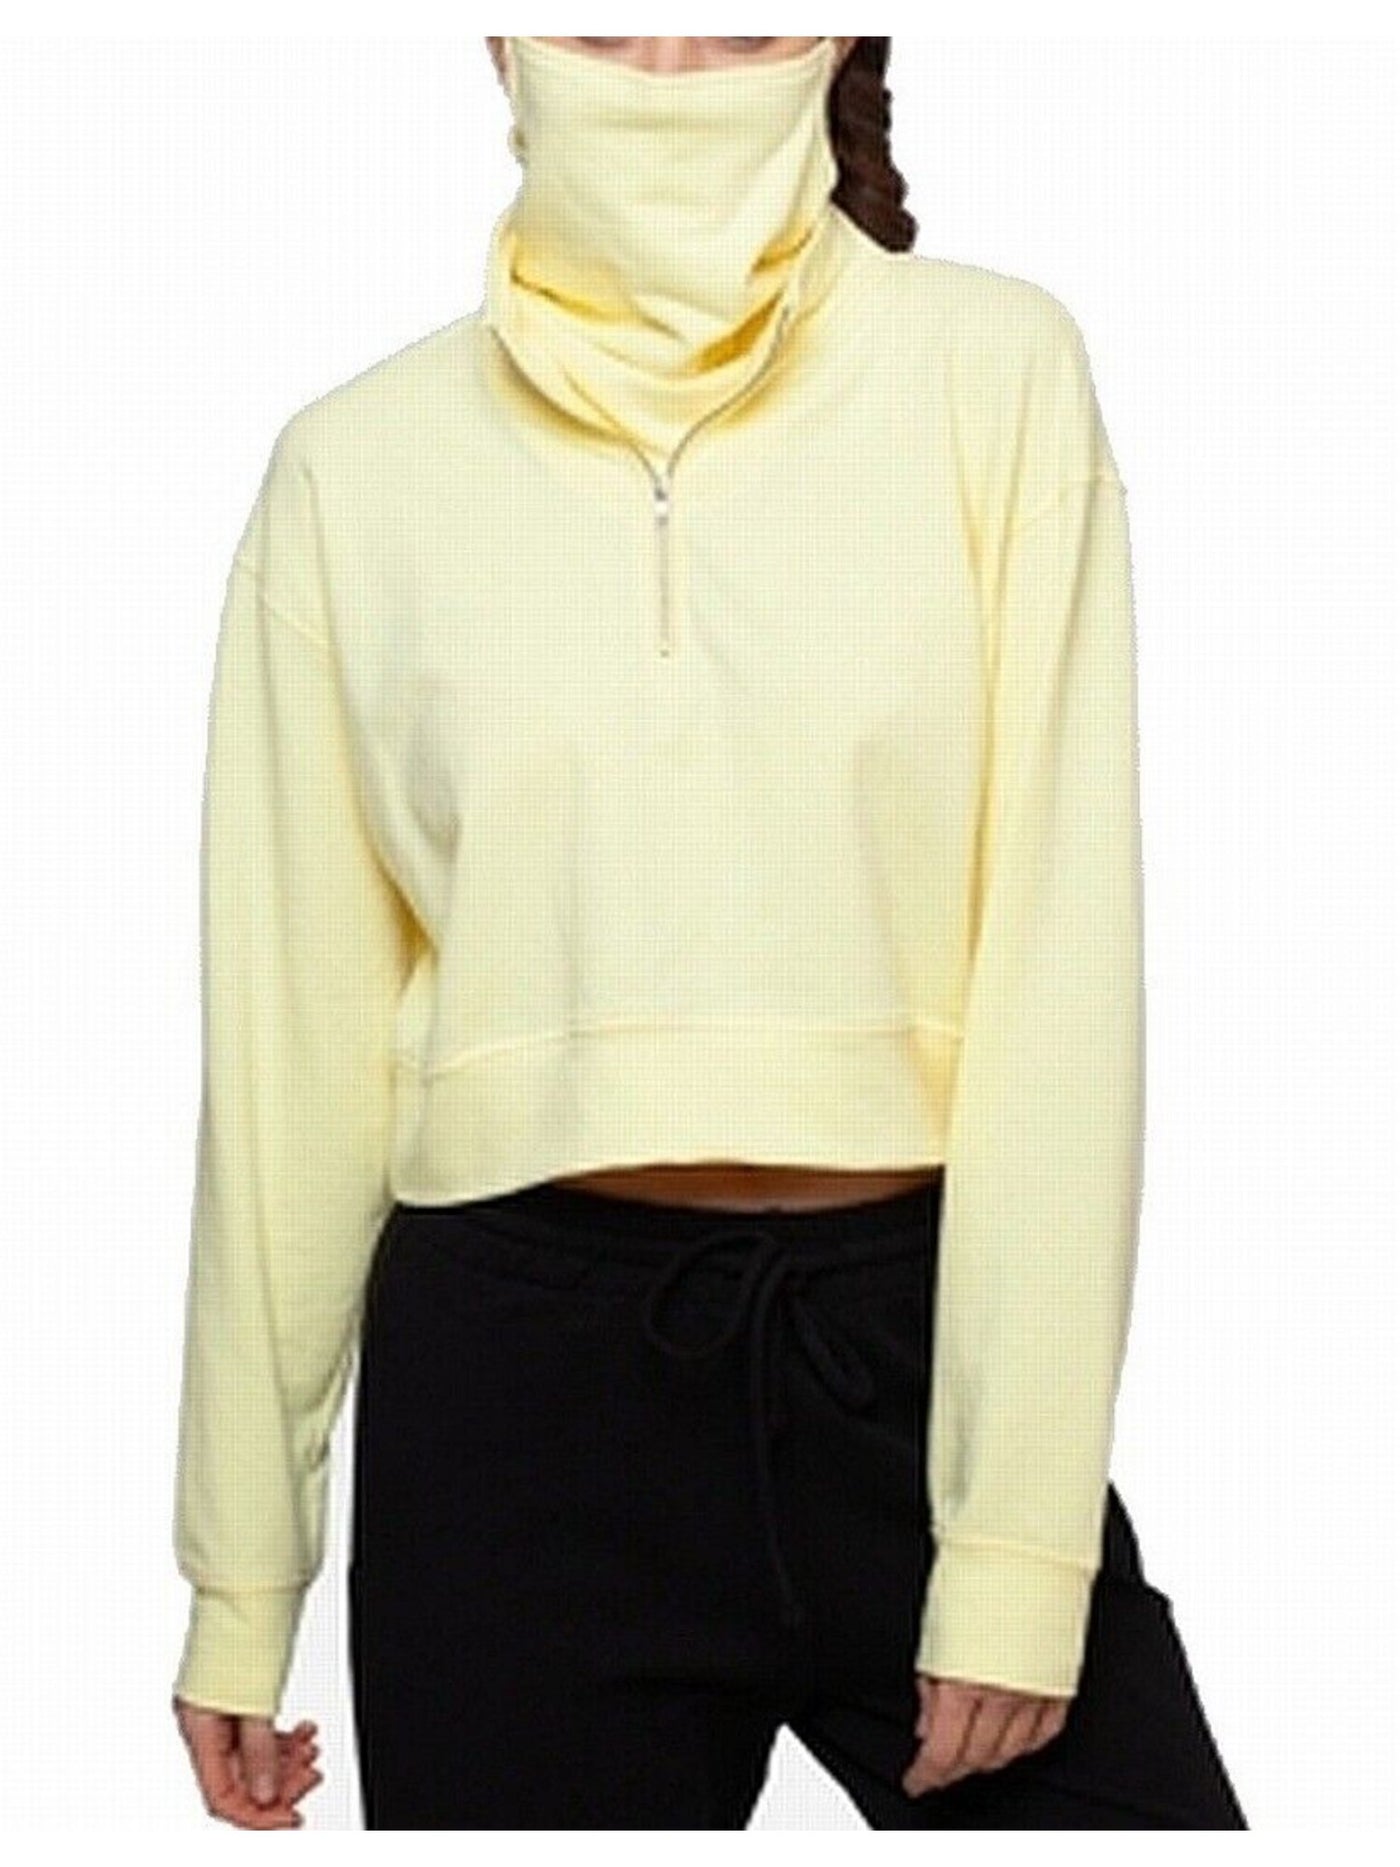 BAM BY BETSY & ADAM Womens Yellow Stretch Long Sleeve Zip Neck Crop Top XS